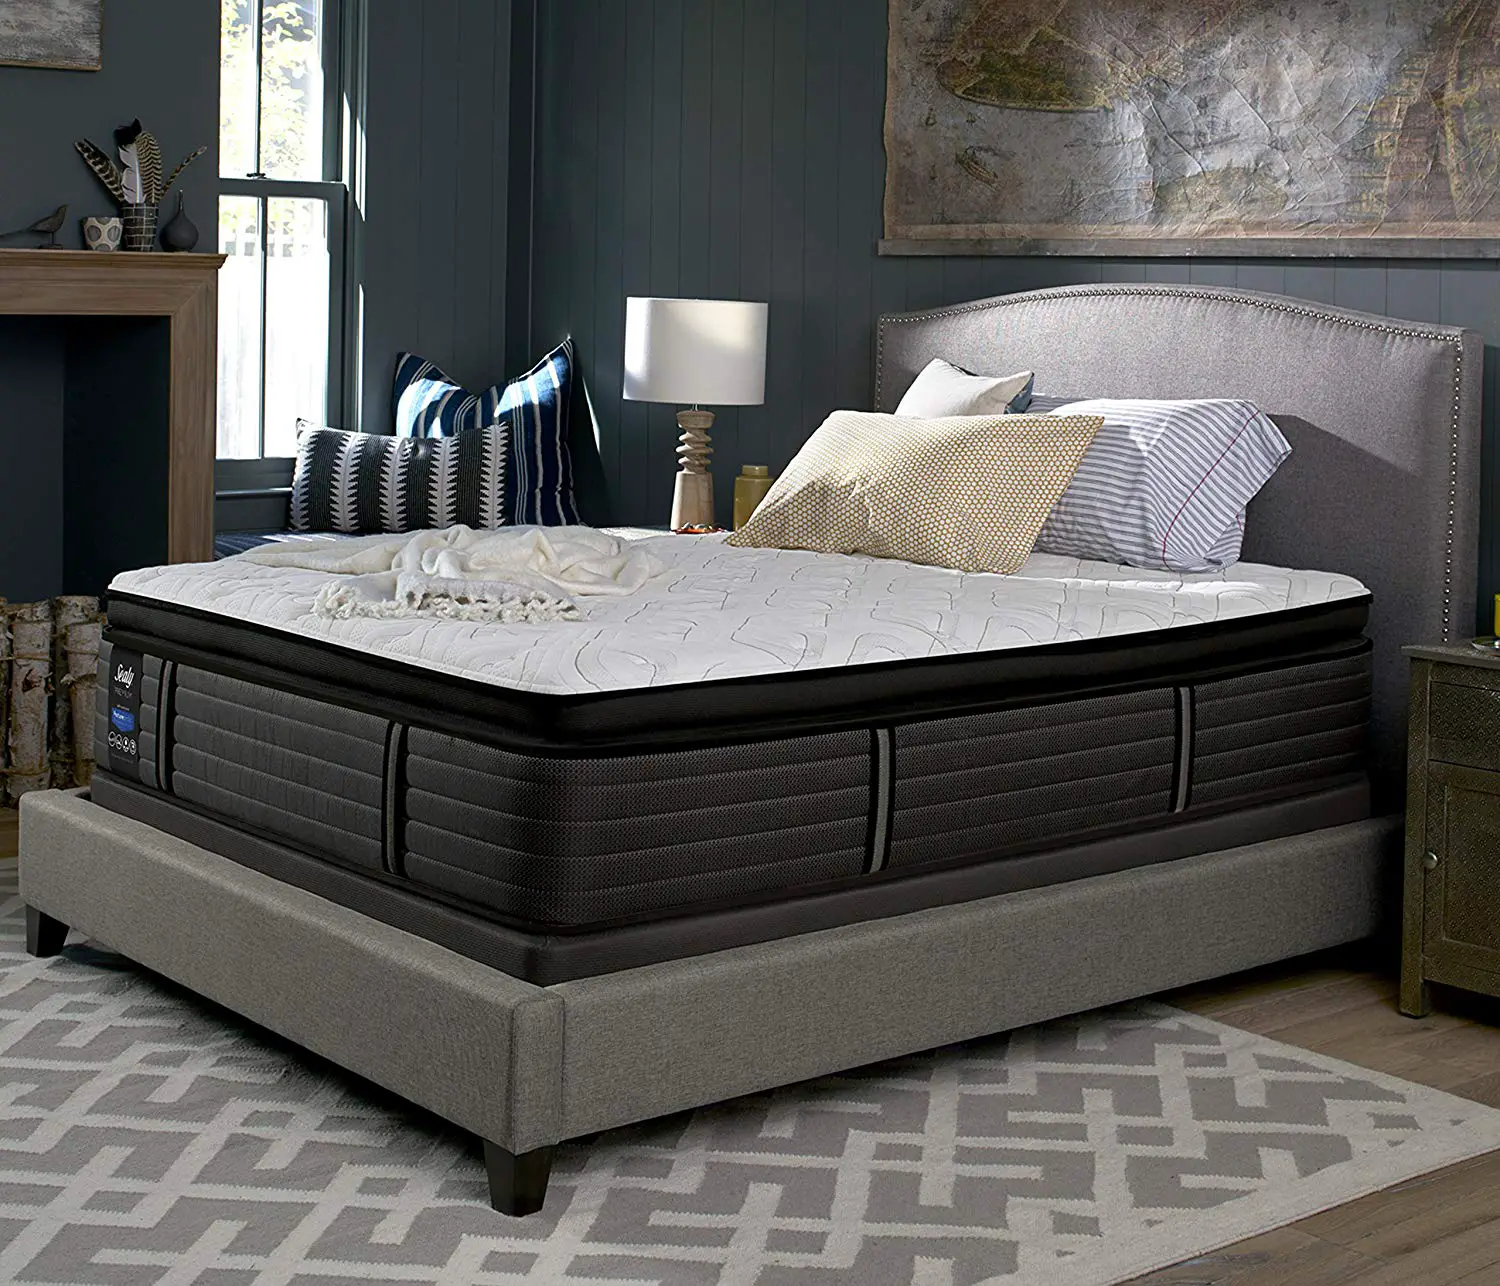 Best Mattress for Side Sleepers â Top Brands And Buying Guide For 2020